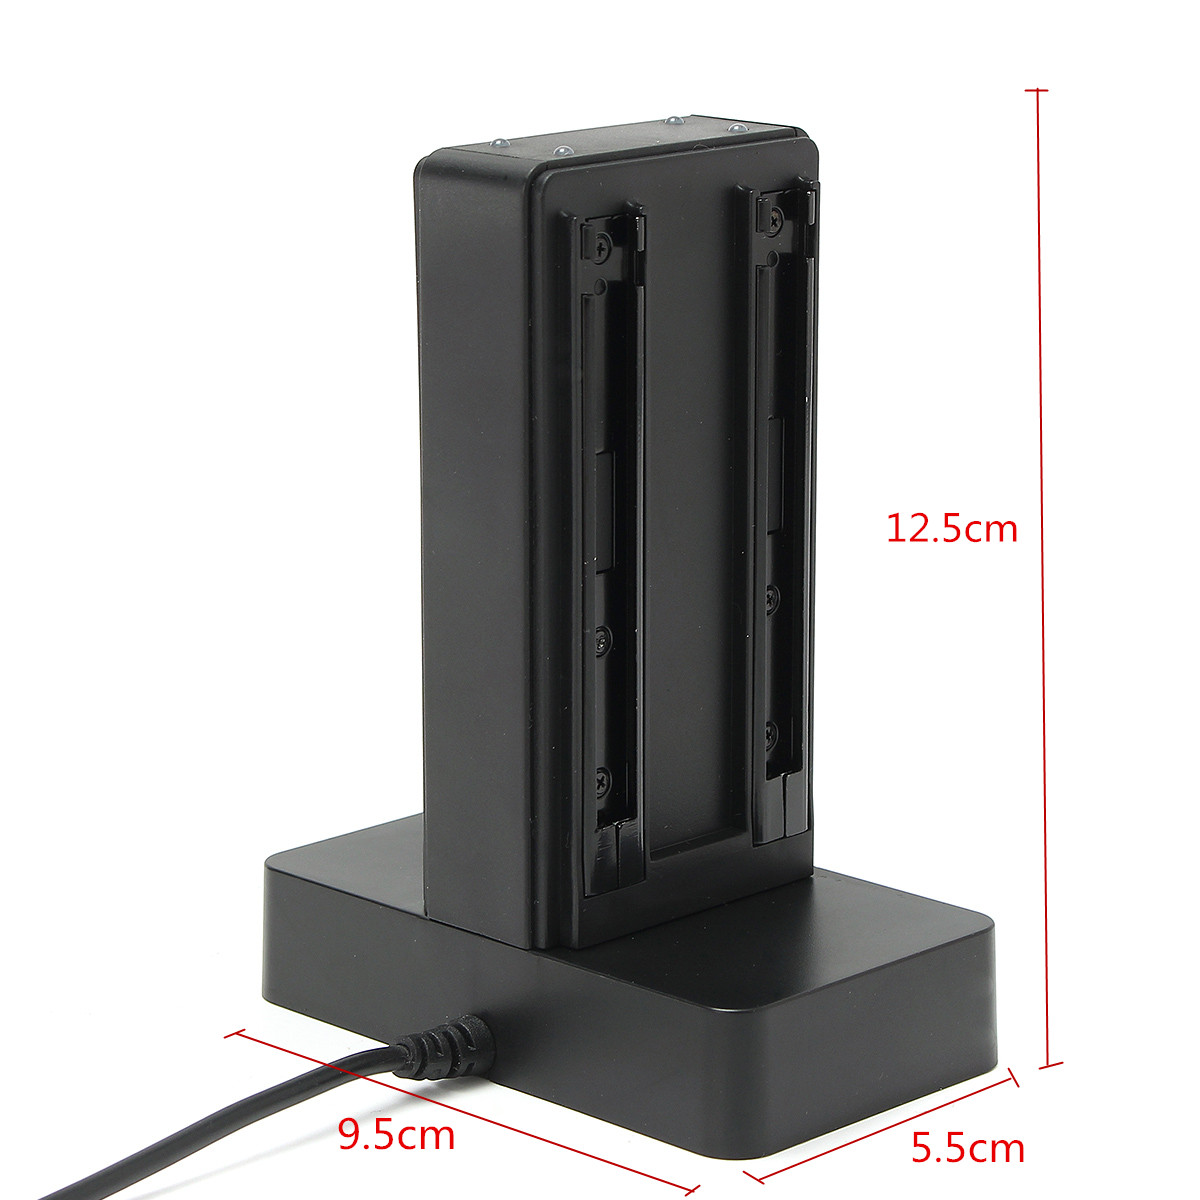 Charging Dock Station Charger Stand For Nintendo Switch 4 Joy-Con Controller 10